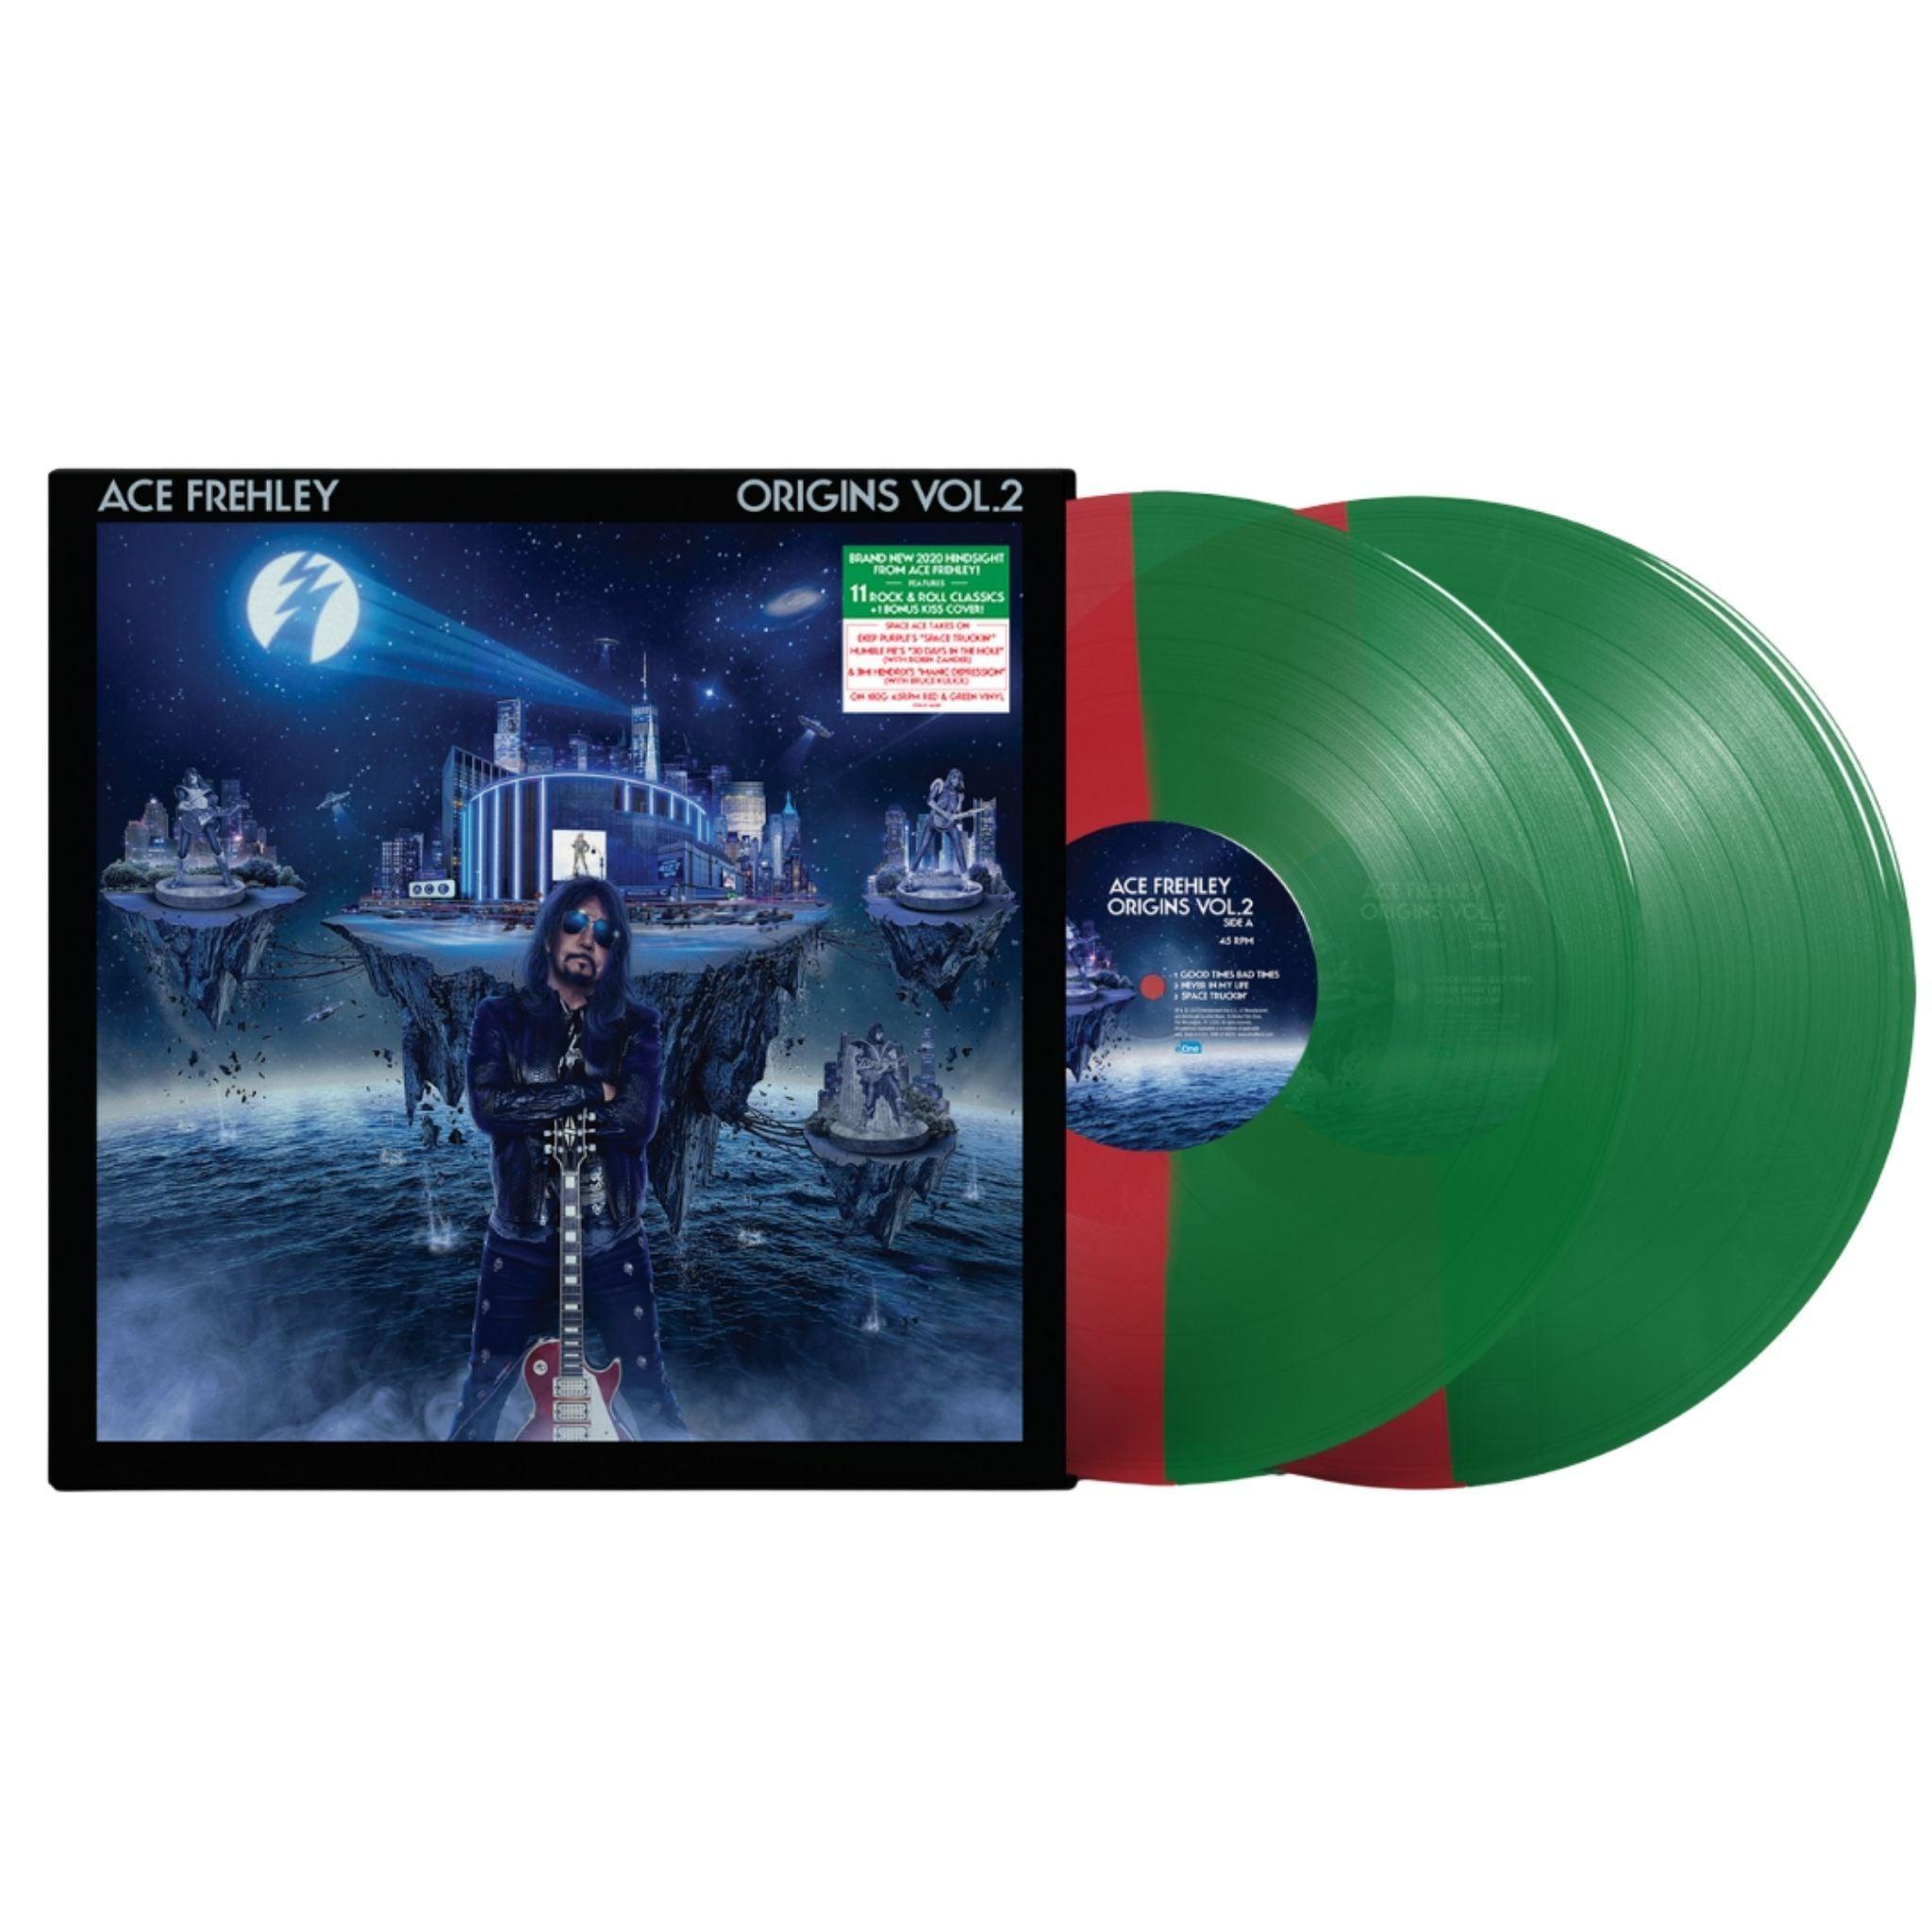 Ace Frehley - "Origins Vol.2" Red Green Edition Vinyl (Blemished)